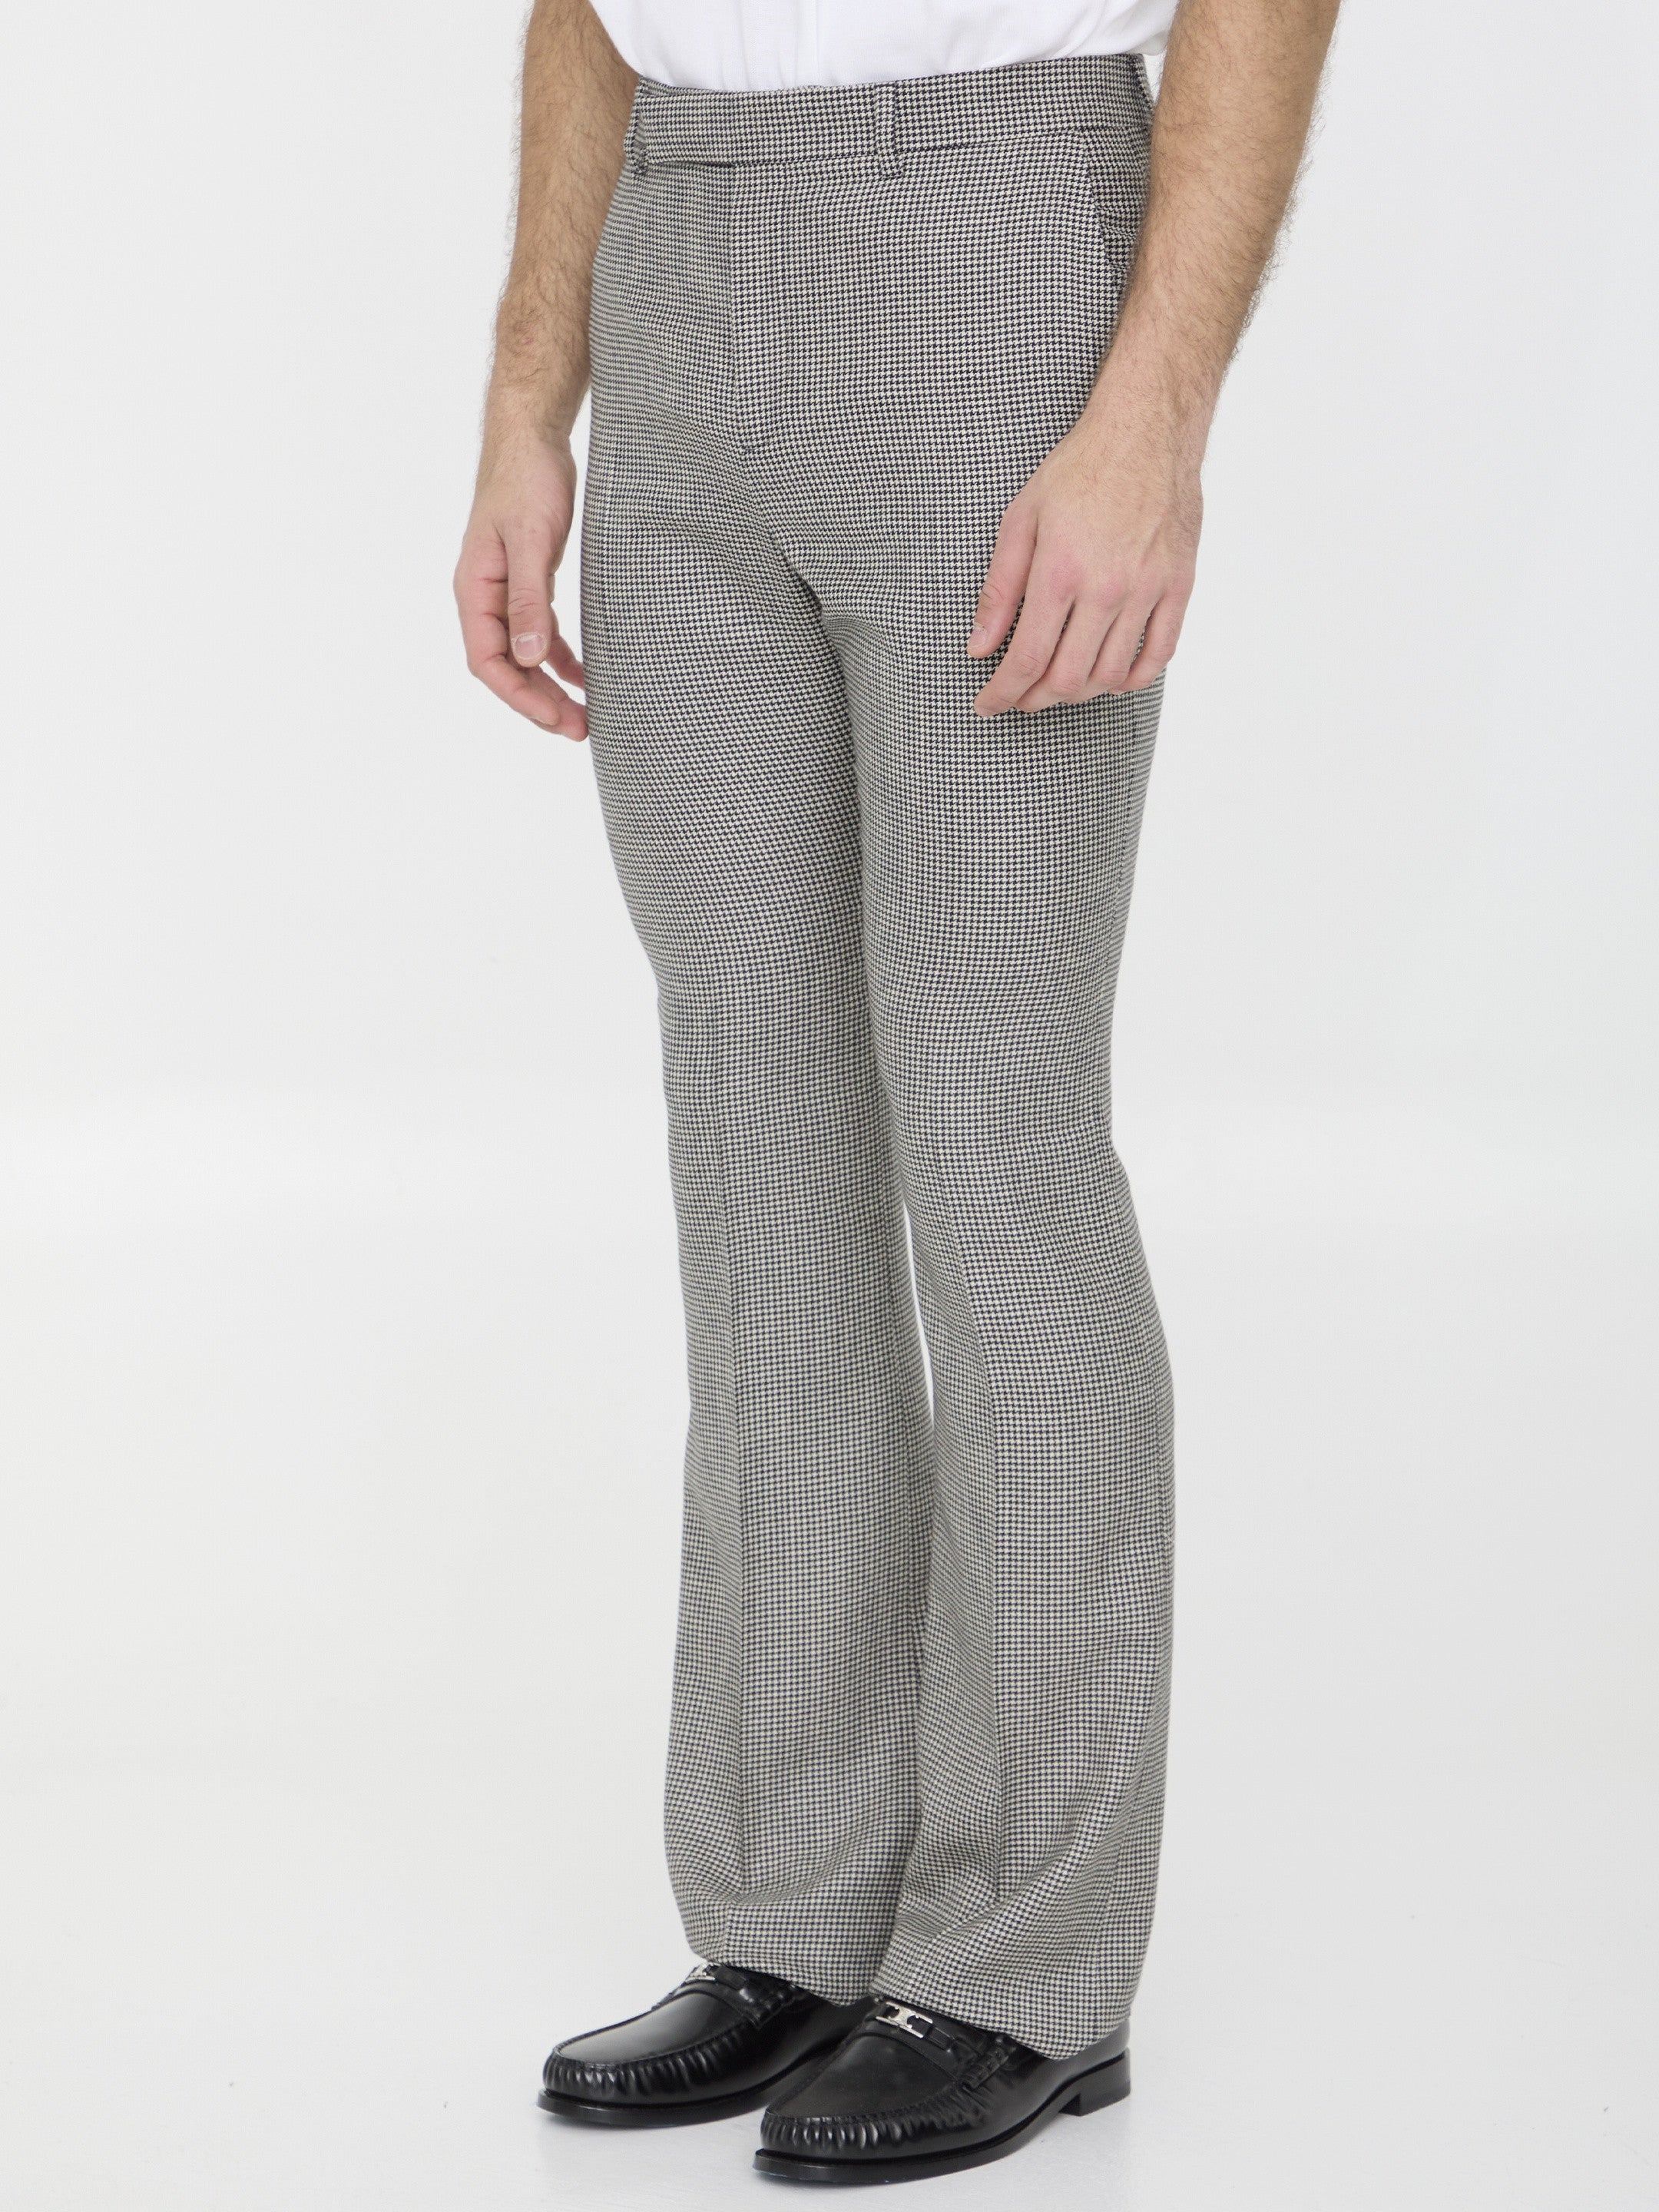 Wool and cashmere pants